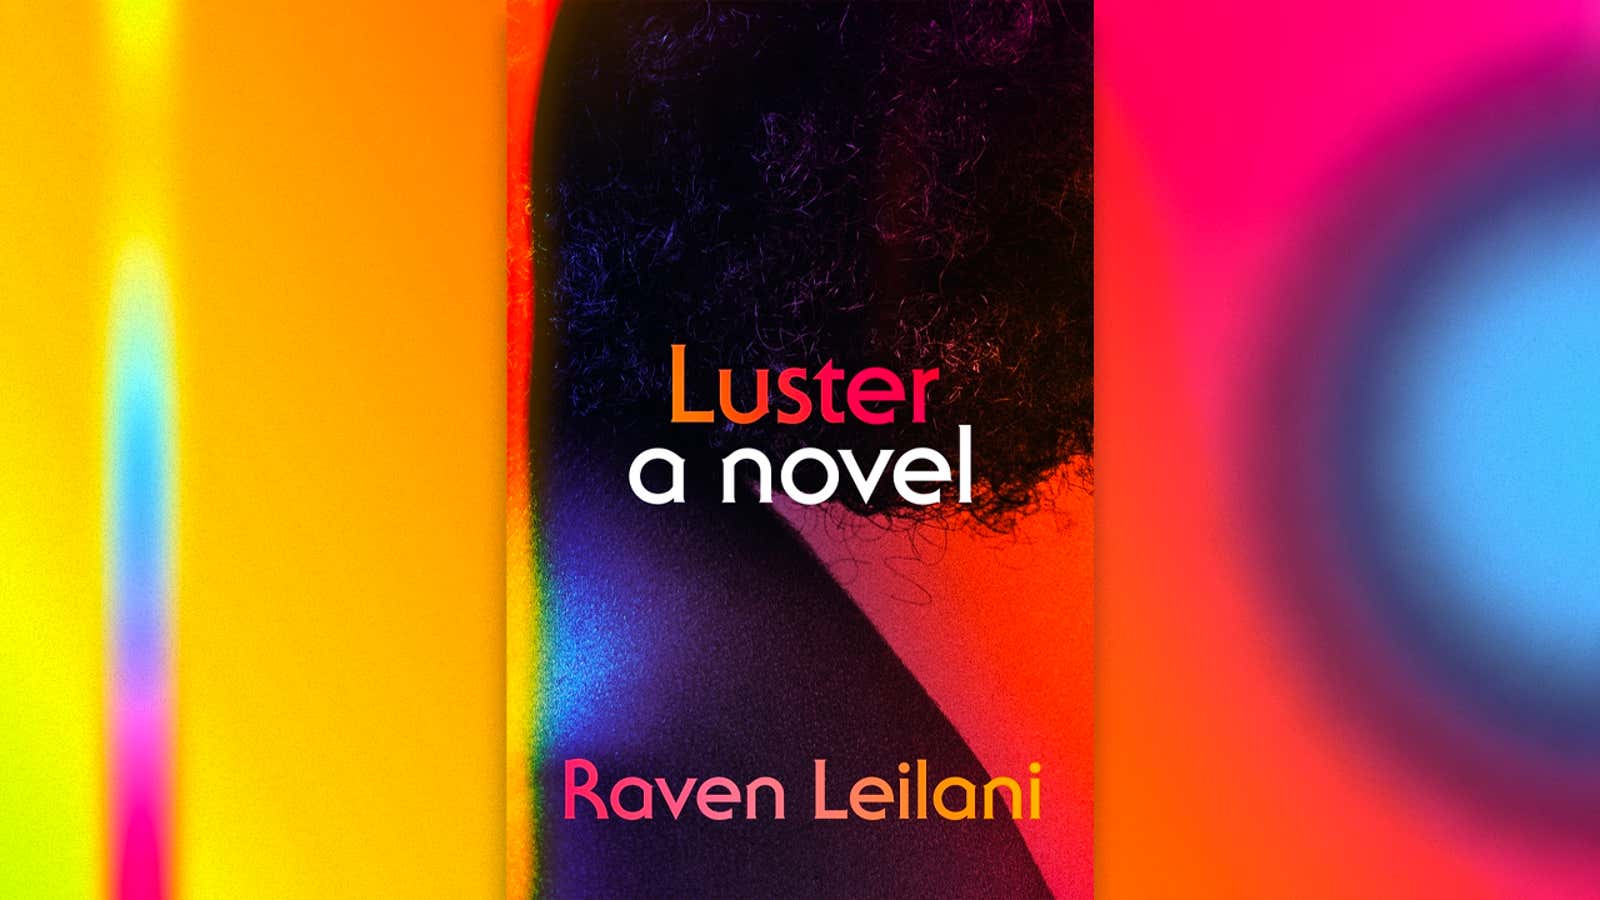 Raven Leilani’s intoxicating <i>Luster</i> breathes new life into the coming-of-age novel